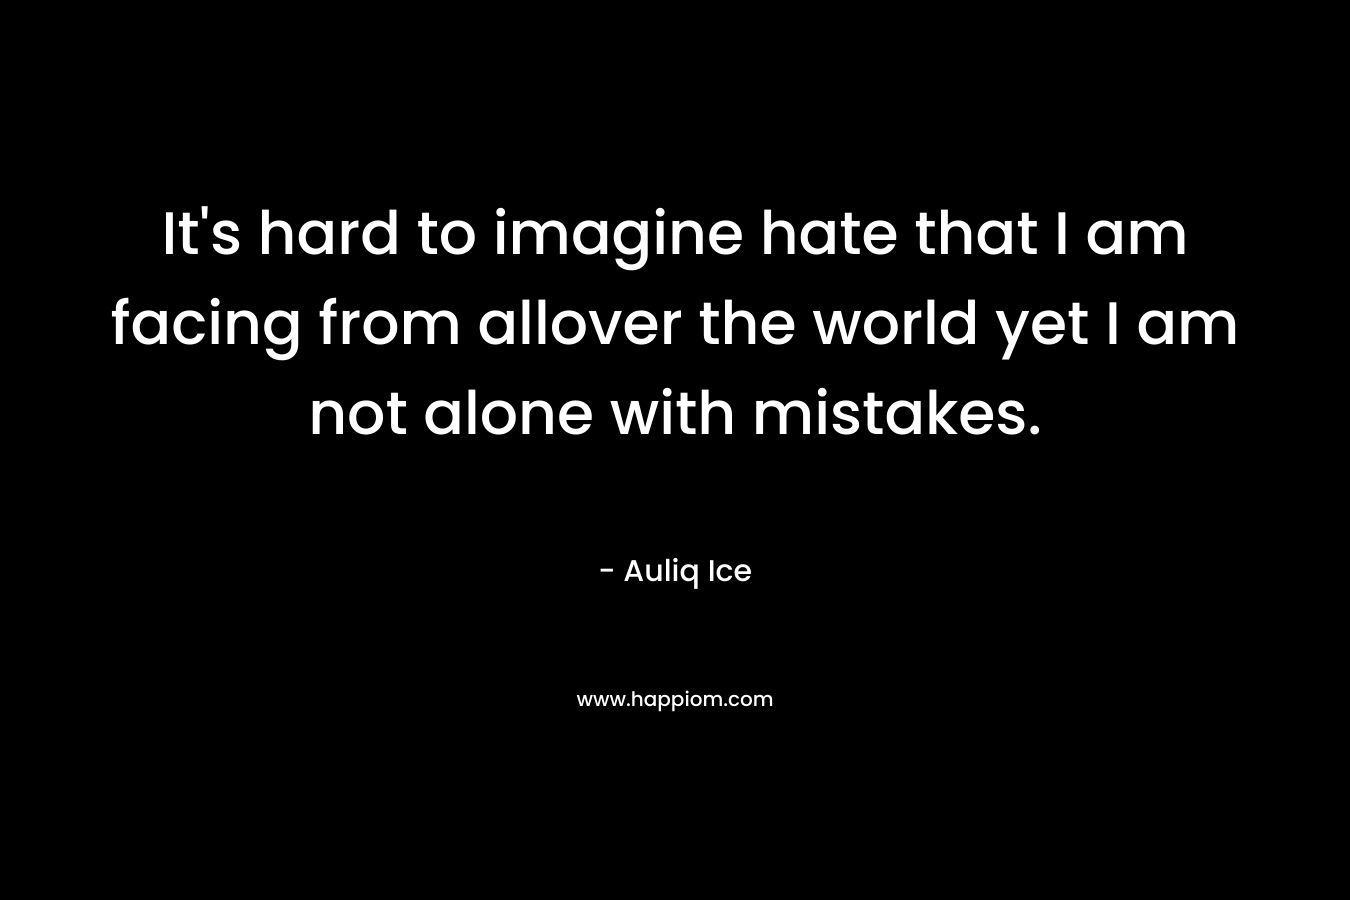 It's hard to imagine hate that I am facing from allover the world yet I am not alone with mistakes.